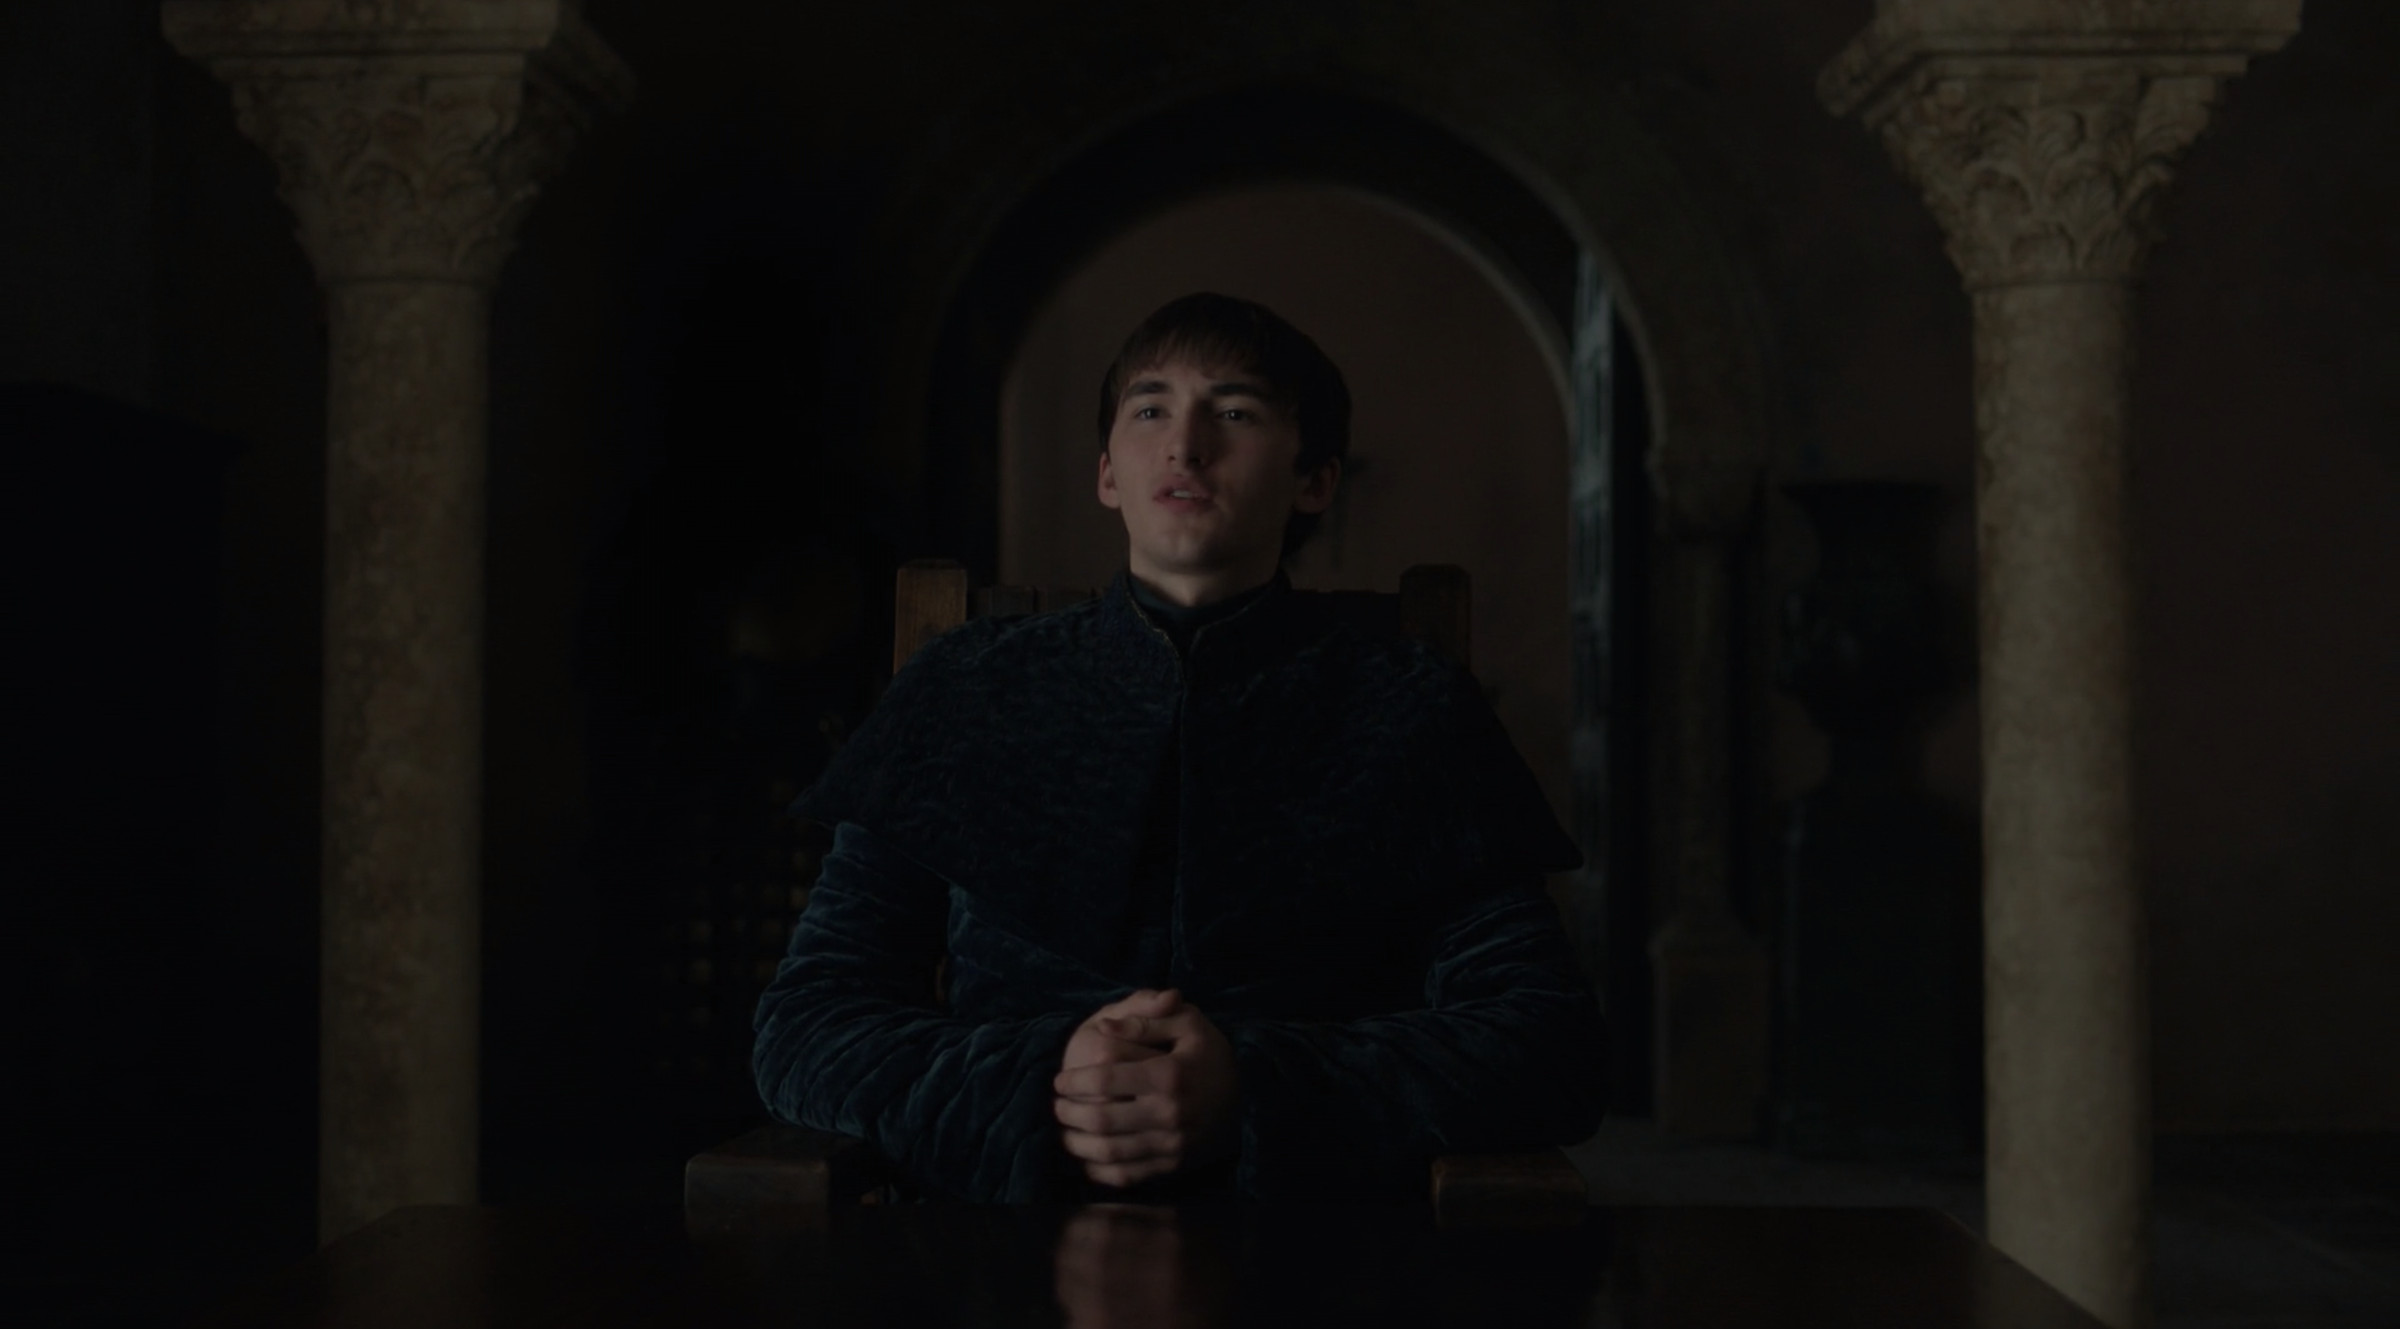 bran stark, who can see everything but lets bad things happen